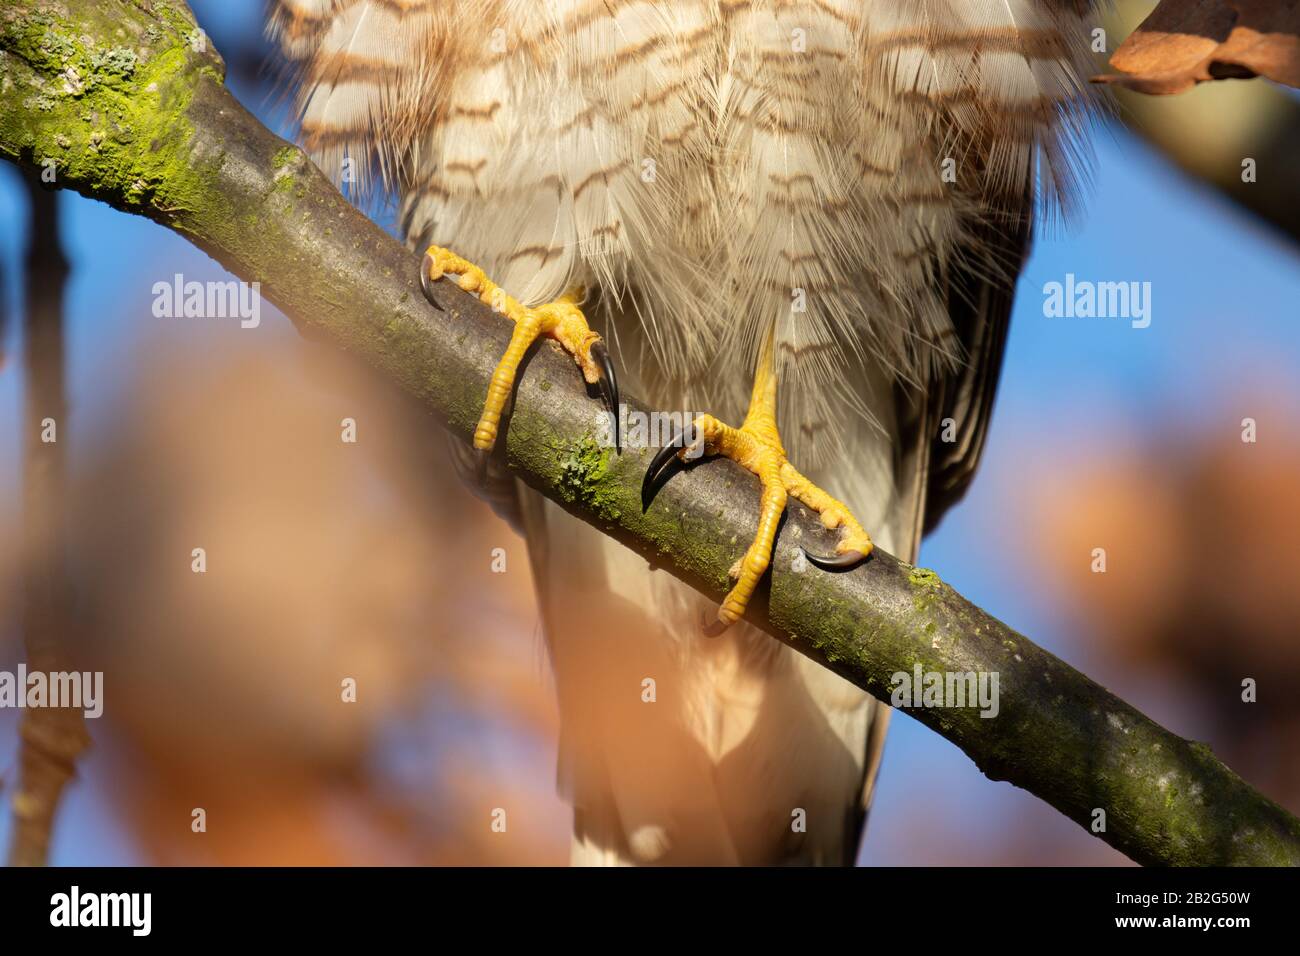 The vibrant yellow feet of a hawk with menacing talons showing Stock Photo